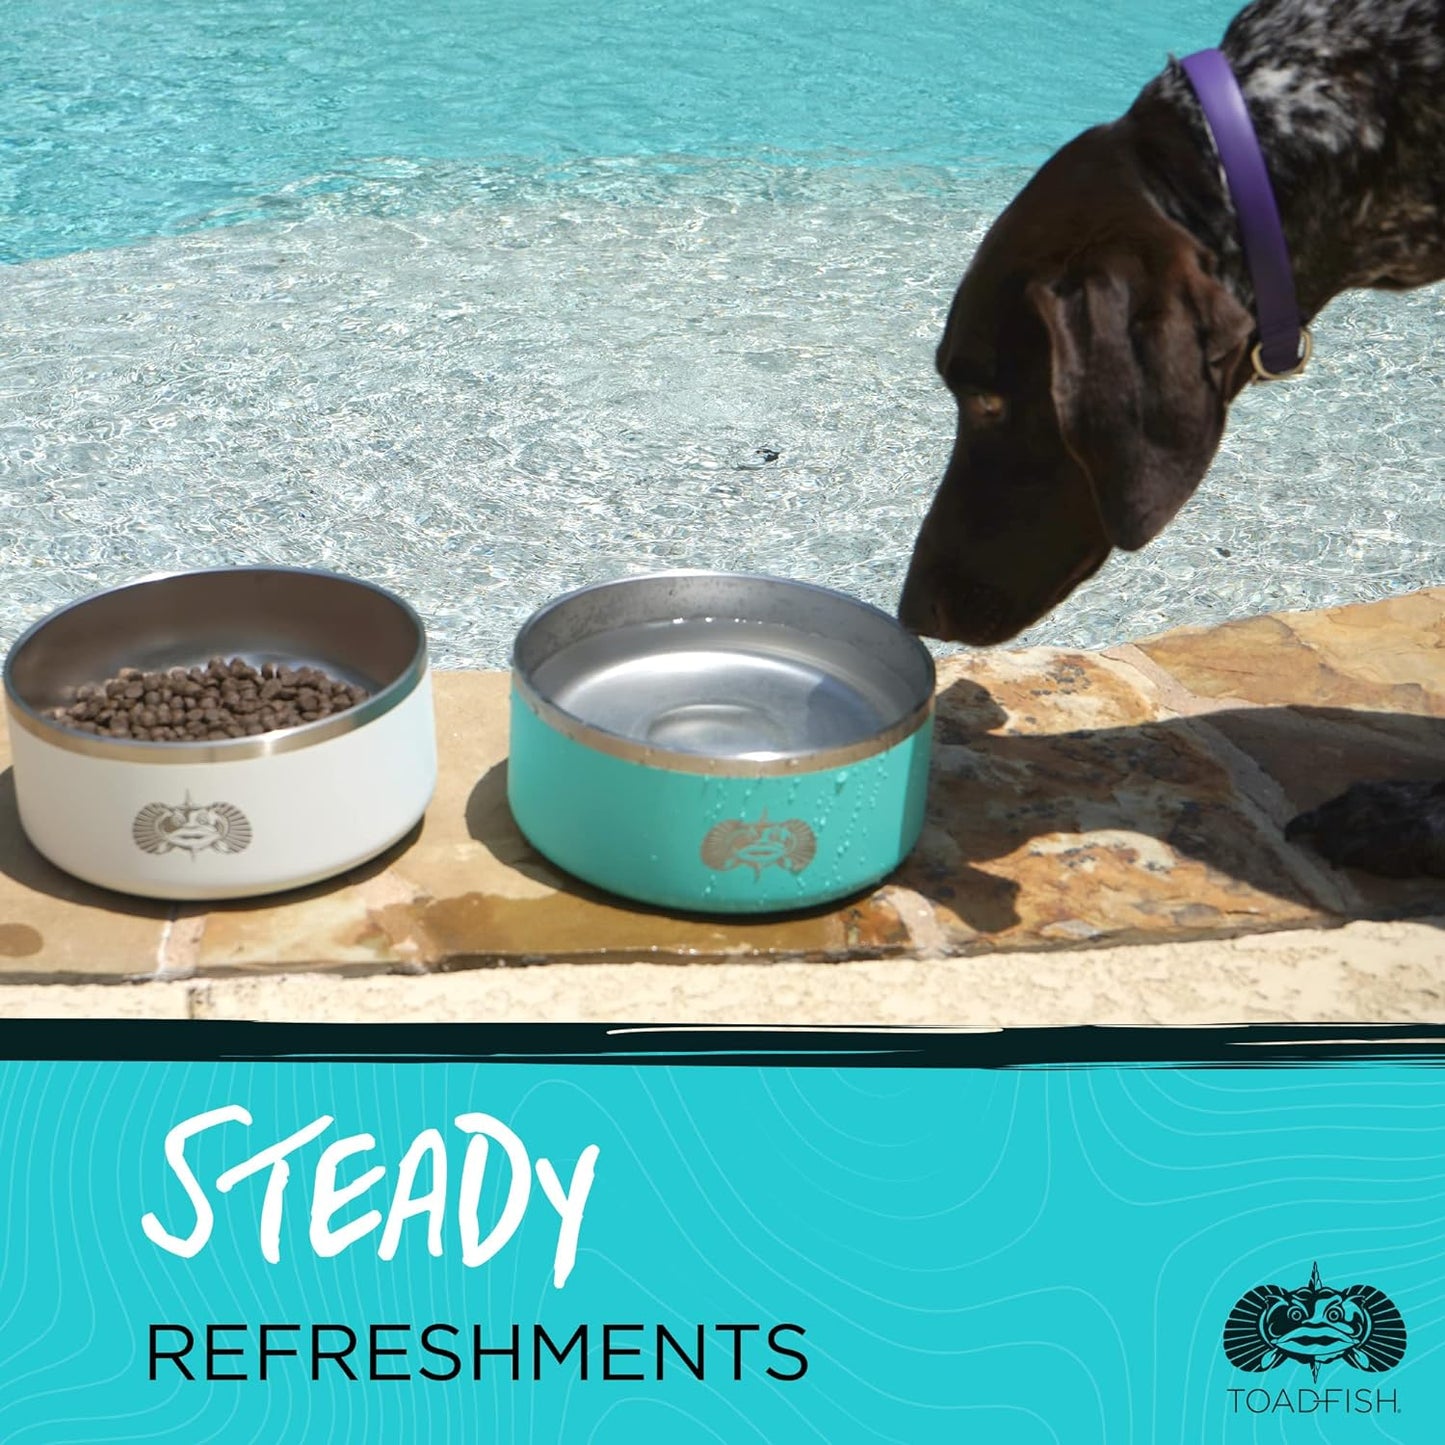 Toadfish Non-Tipping Dog Bowl - Double-Walled Stainless Steel Insulated - Smart-Grip Technology - Includes Cover - Pet Food & Water Dish - White